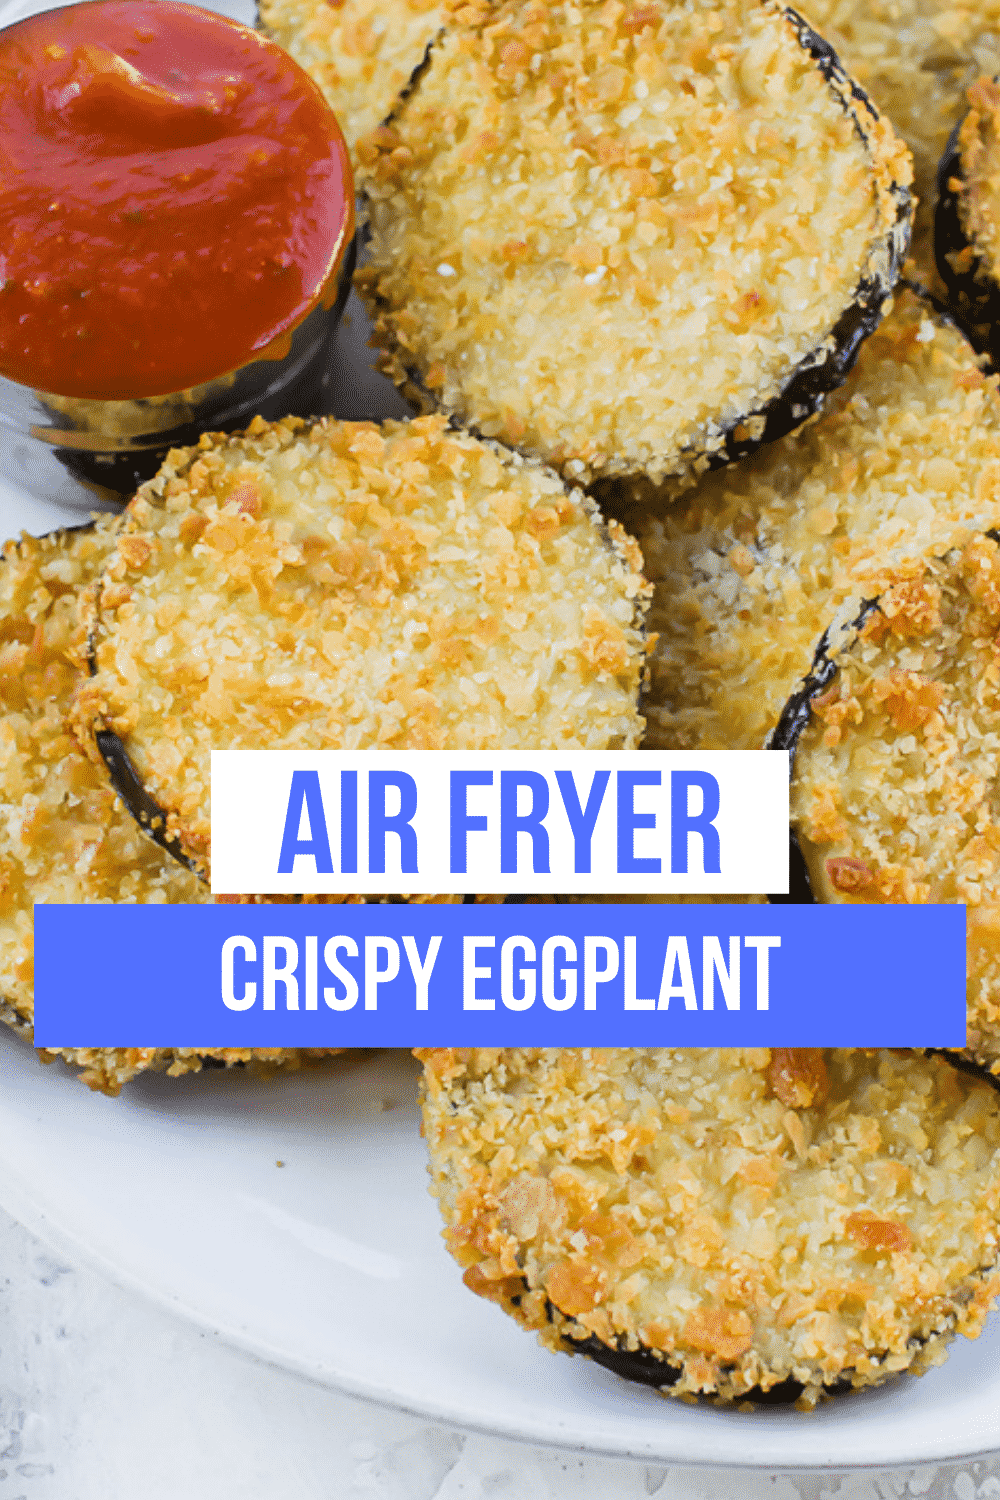 Tender slices of eggplant, air friend to crispy perfection! Crispy Air Fryer Eggplant will find a happy place on your dinner table now that you know how to make it perfectly. #eggplant #airfryer via @vegetarianmamma